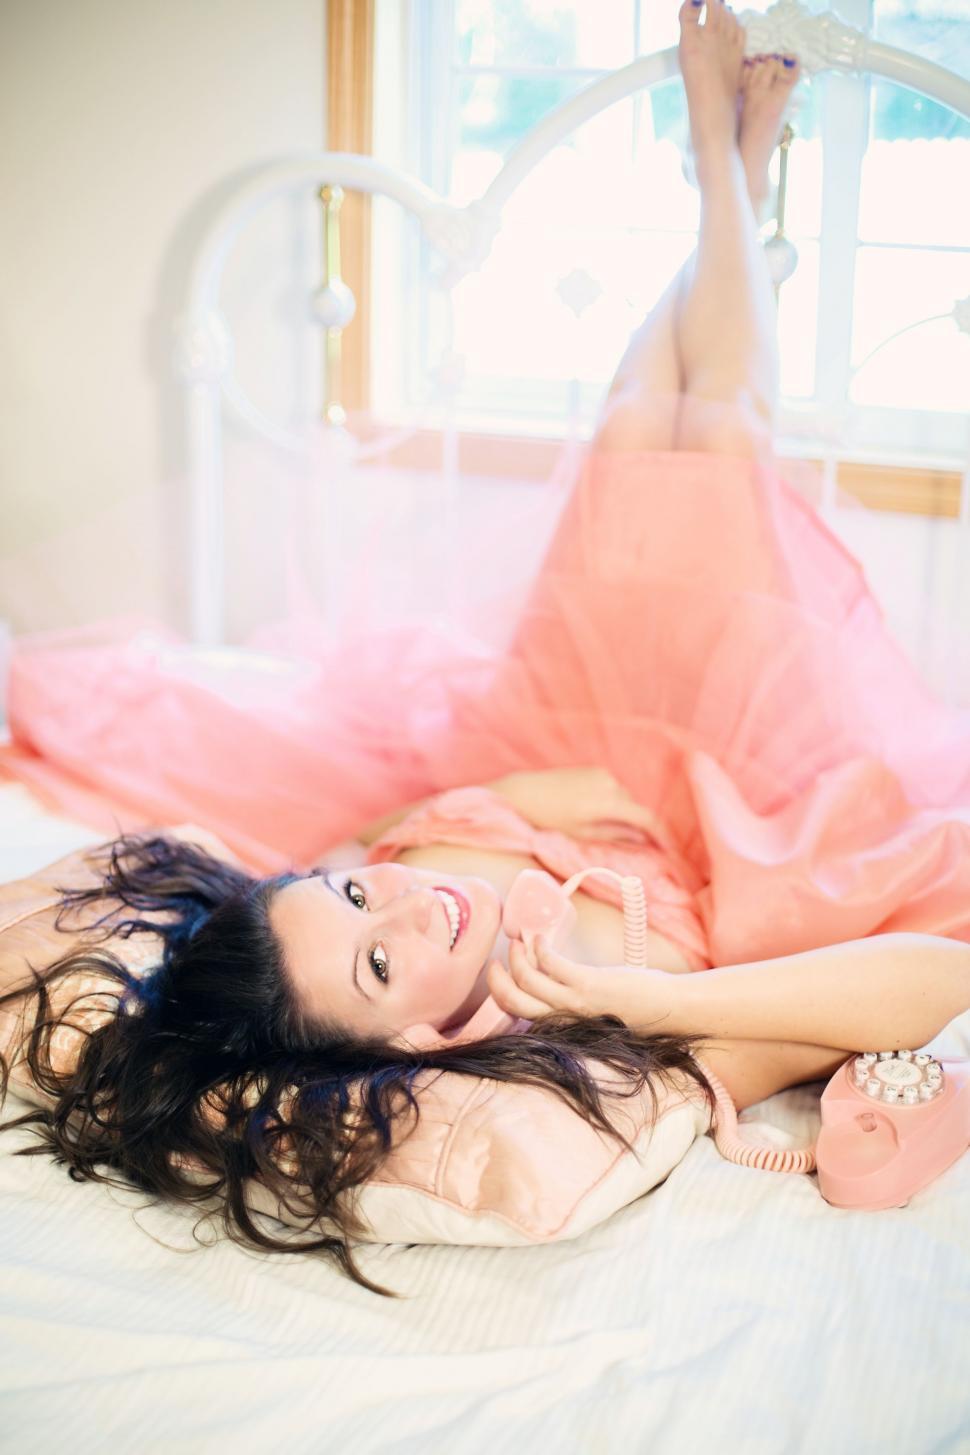 Free Image of Woman With Old Pink Telephone on bed - Looking at camera 